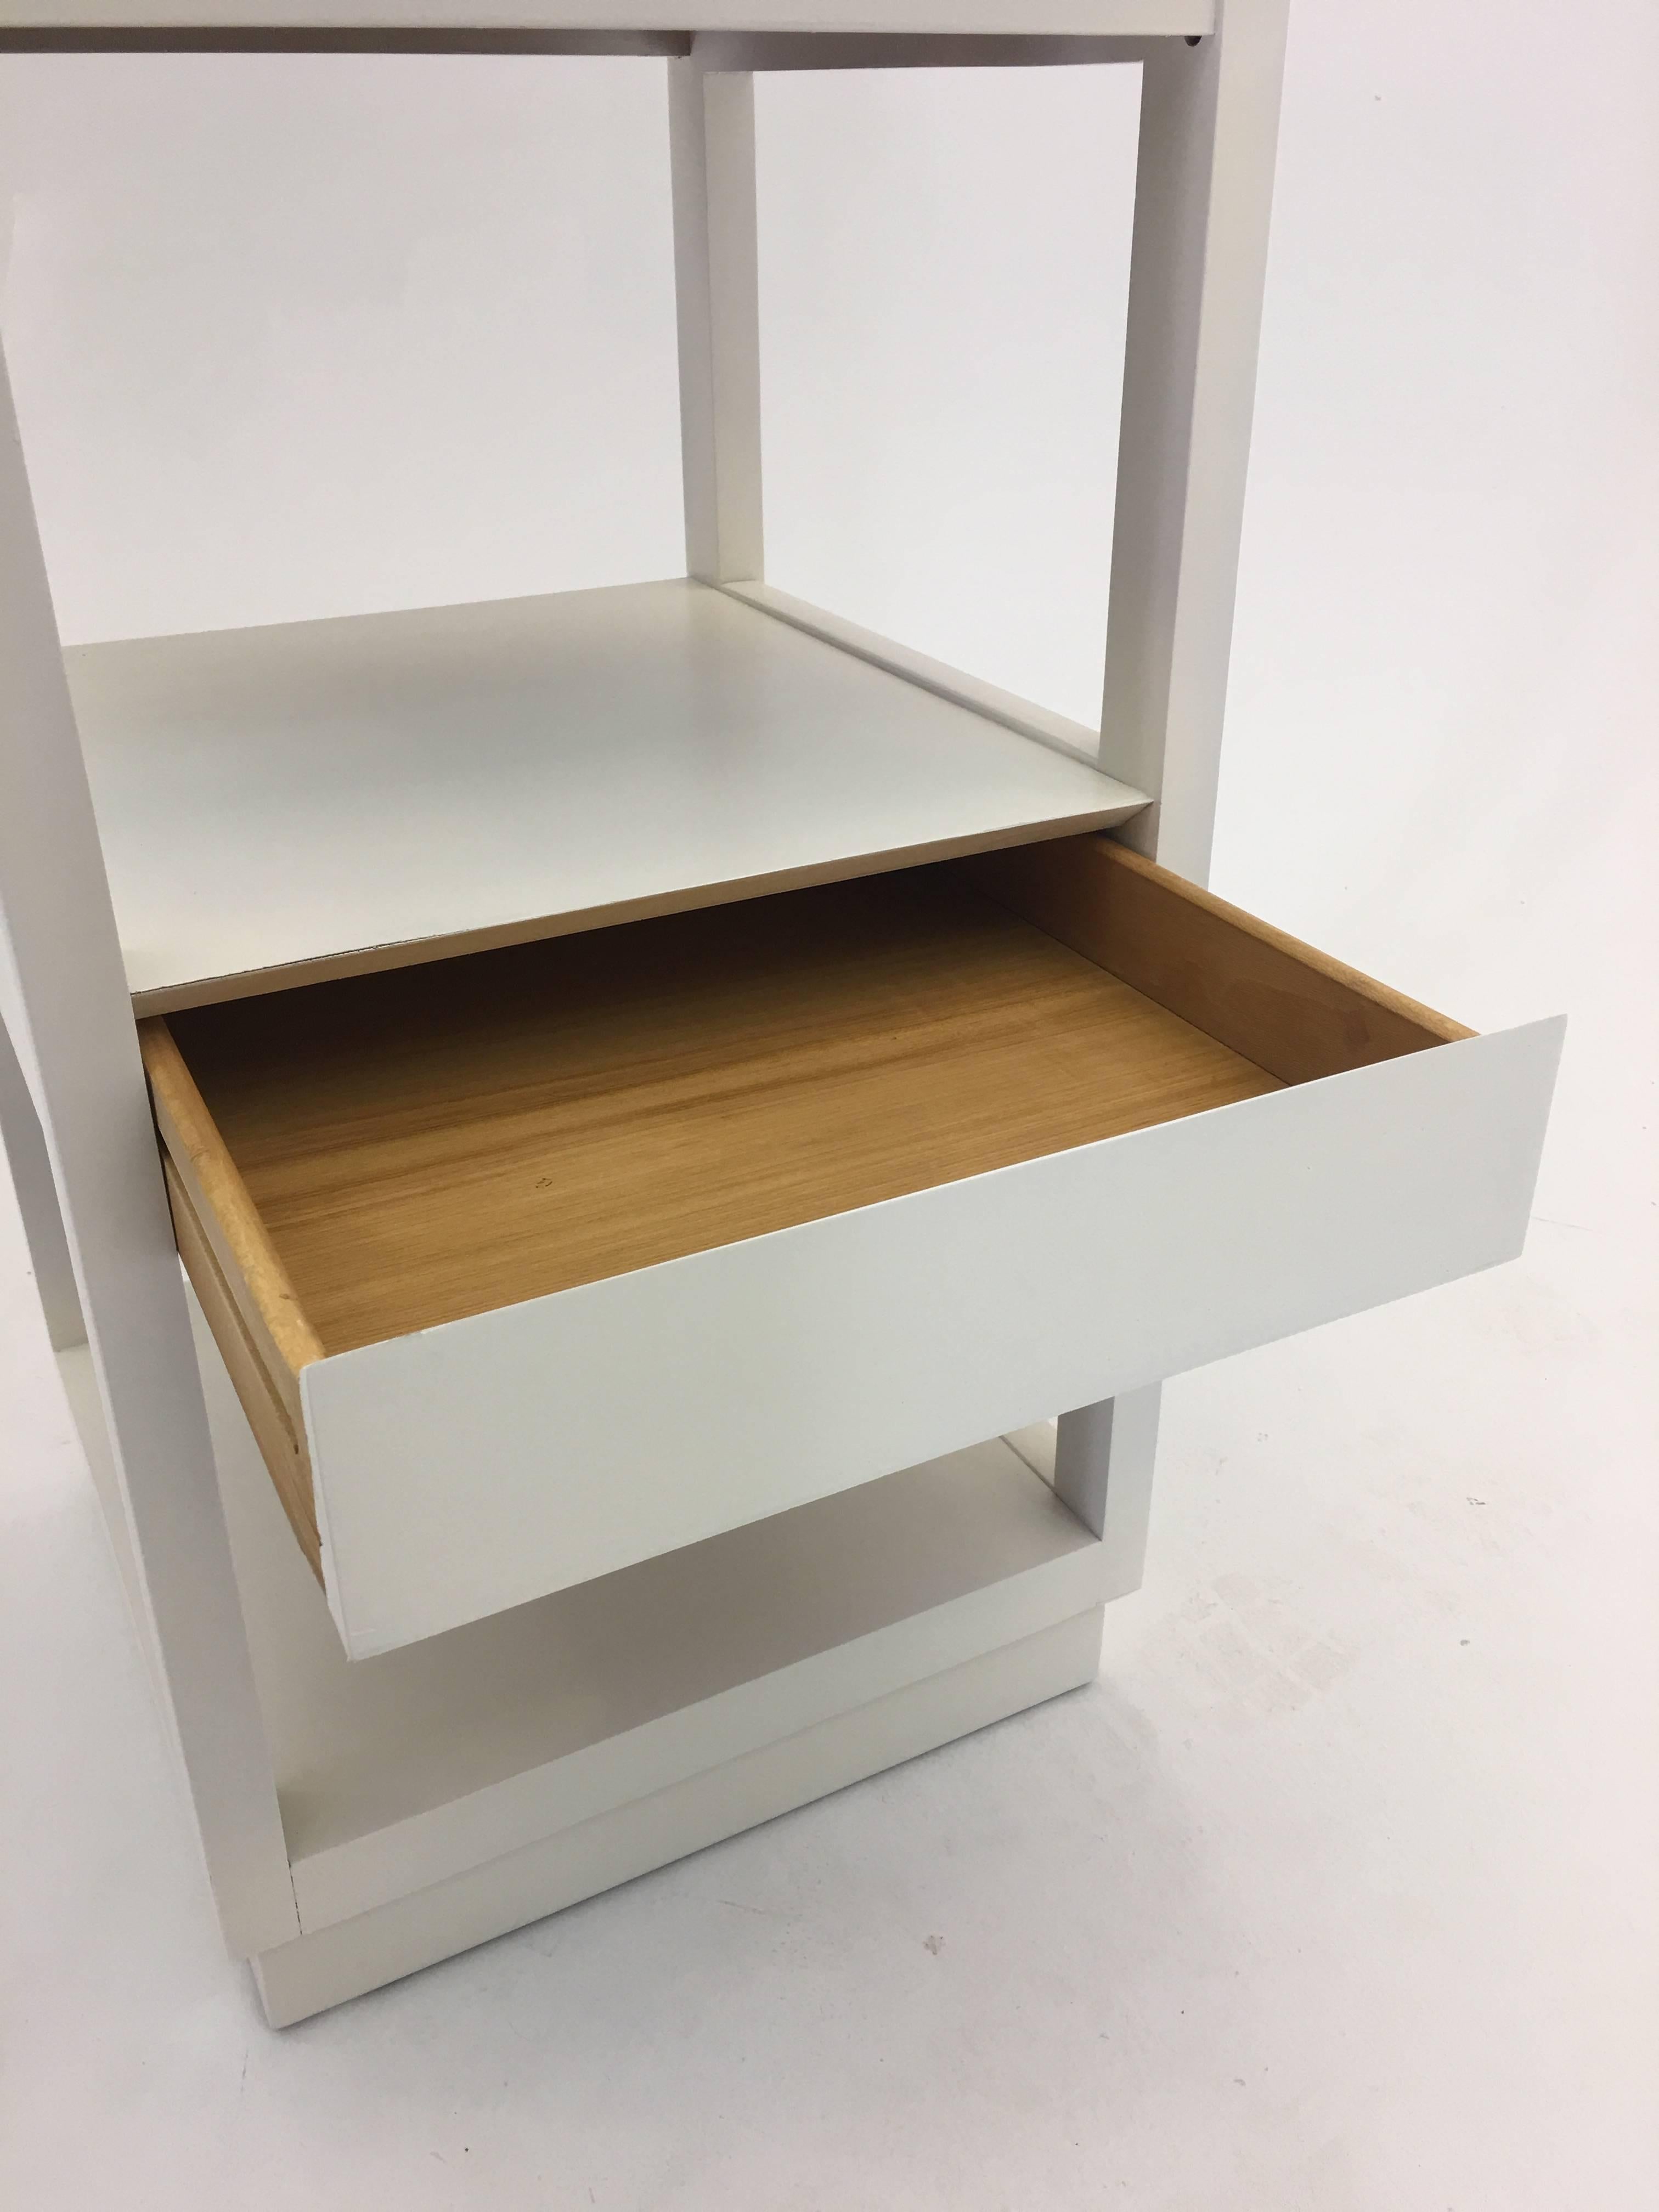 Multipurpose Stand by Edward Wormley with Concealed Drawer (amerikanisch)